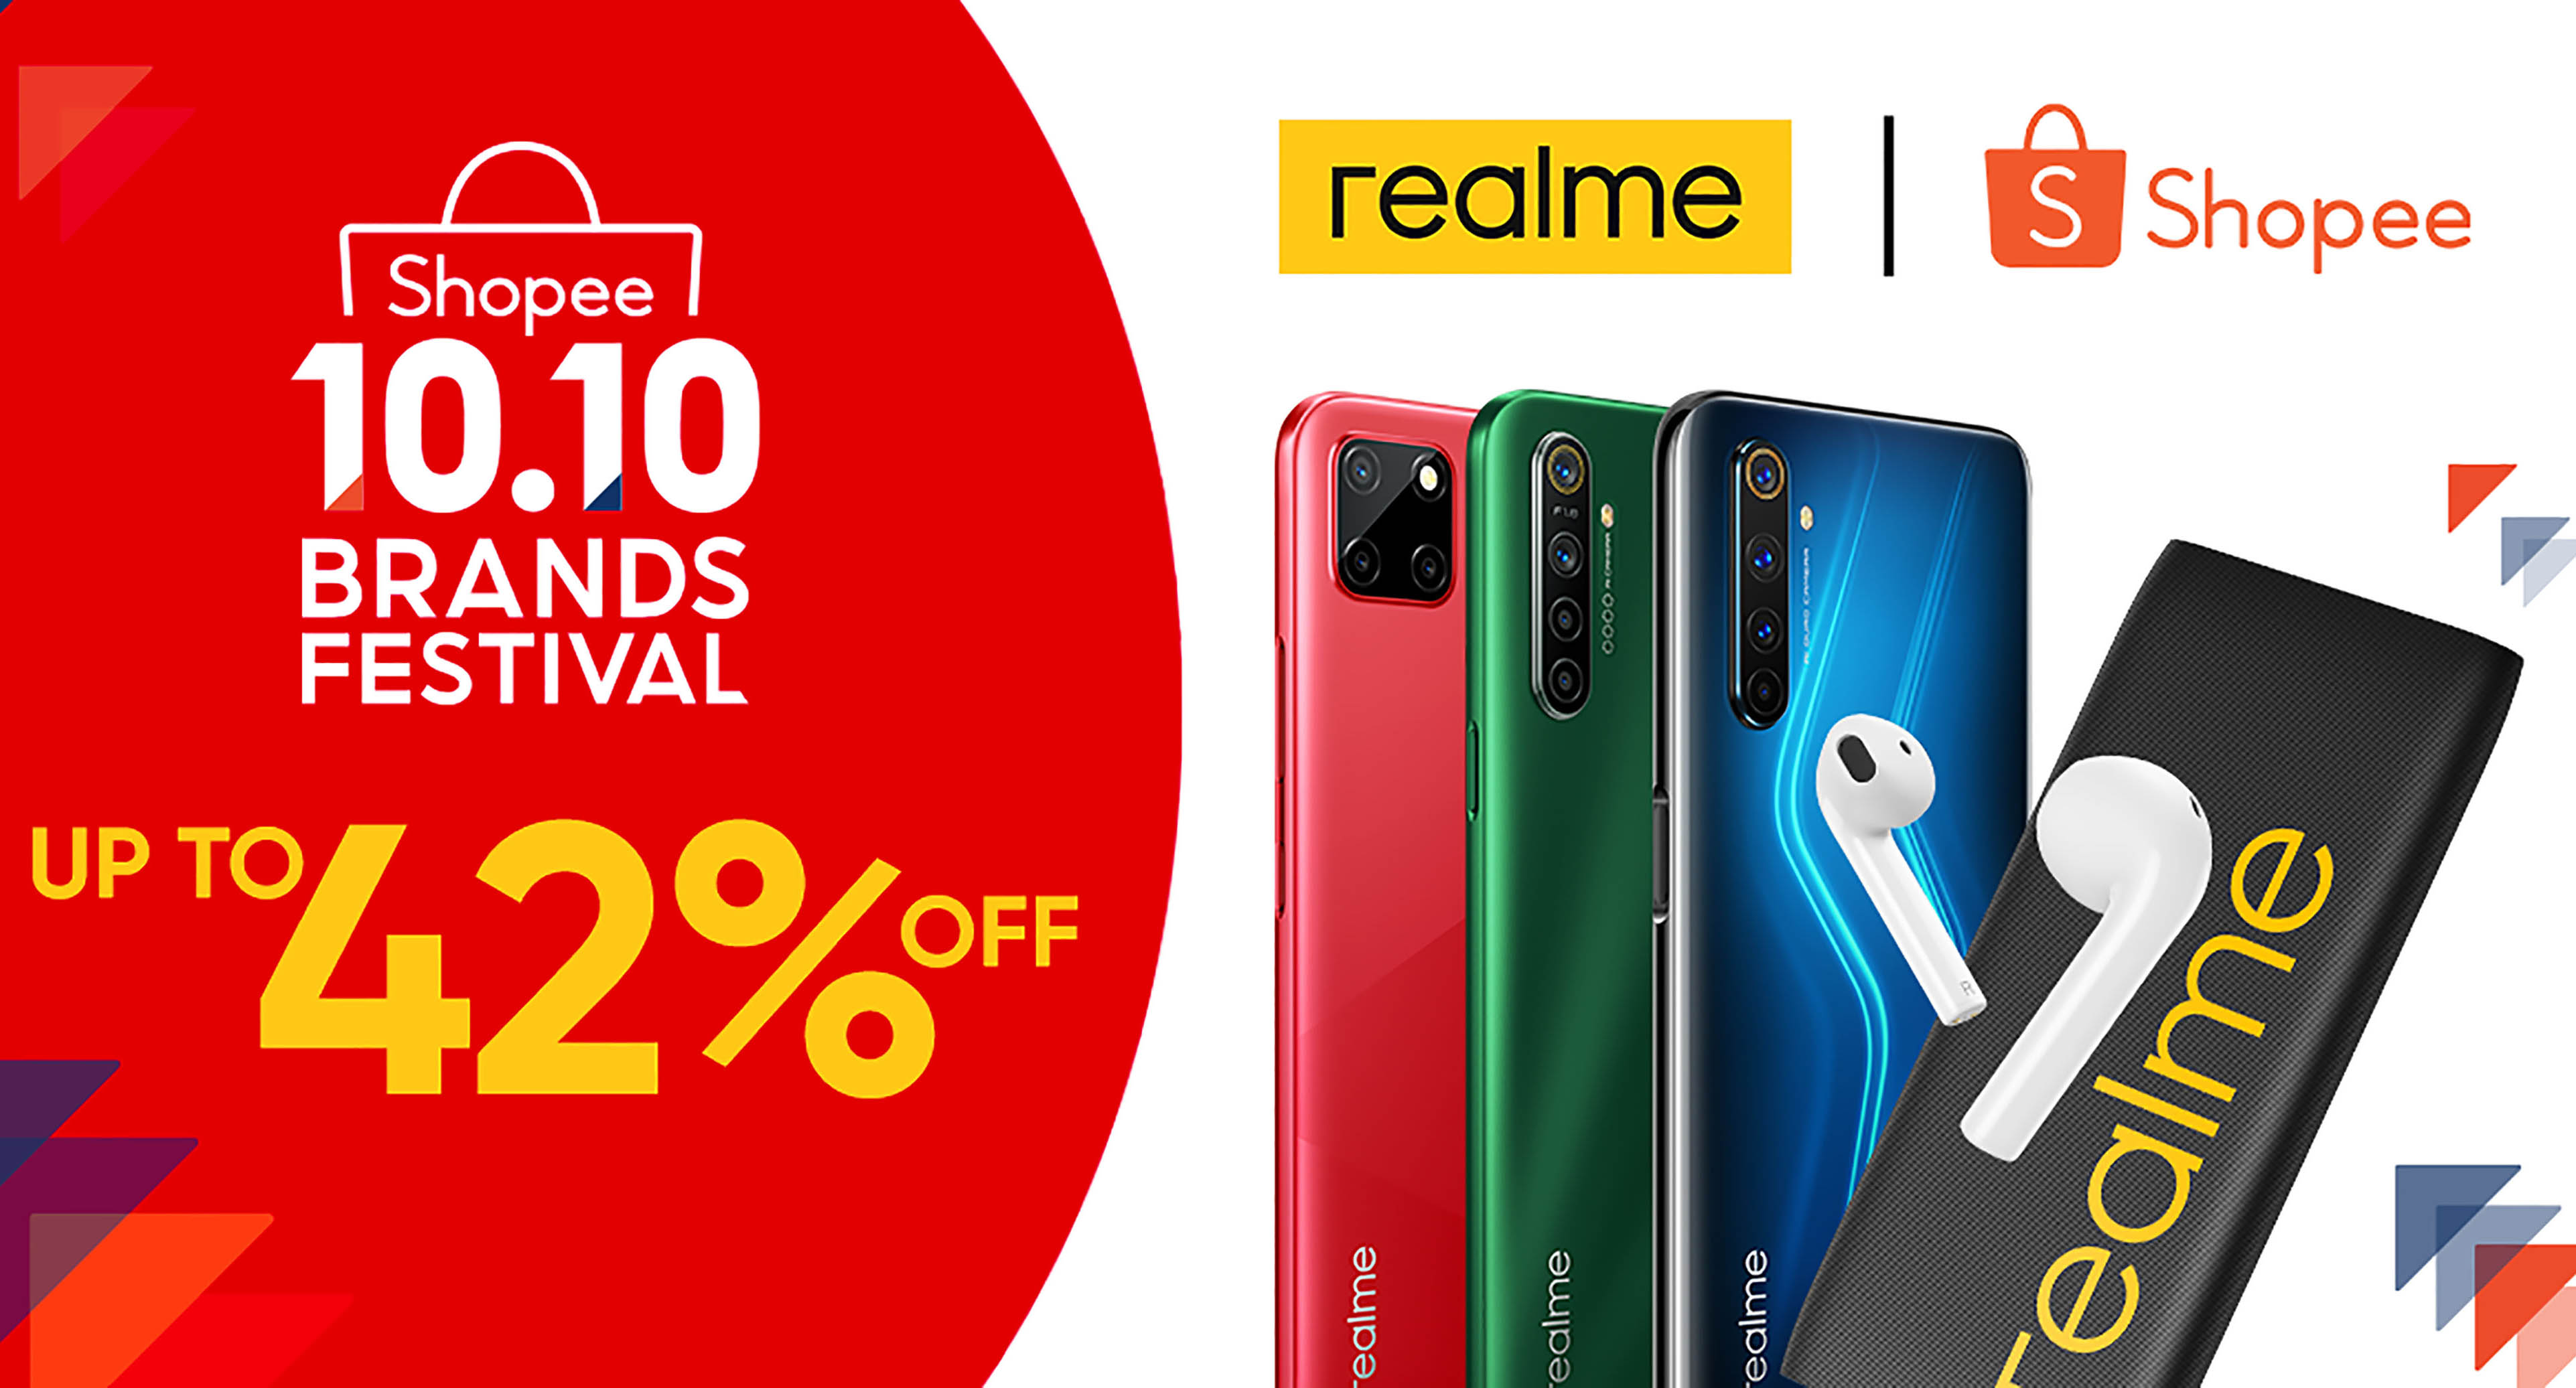 Discounts up to 42% await realme fans at Shopee 10.10 Brand Festival Sale